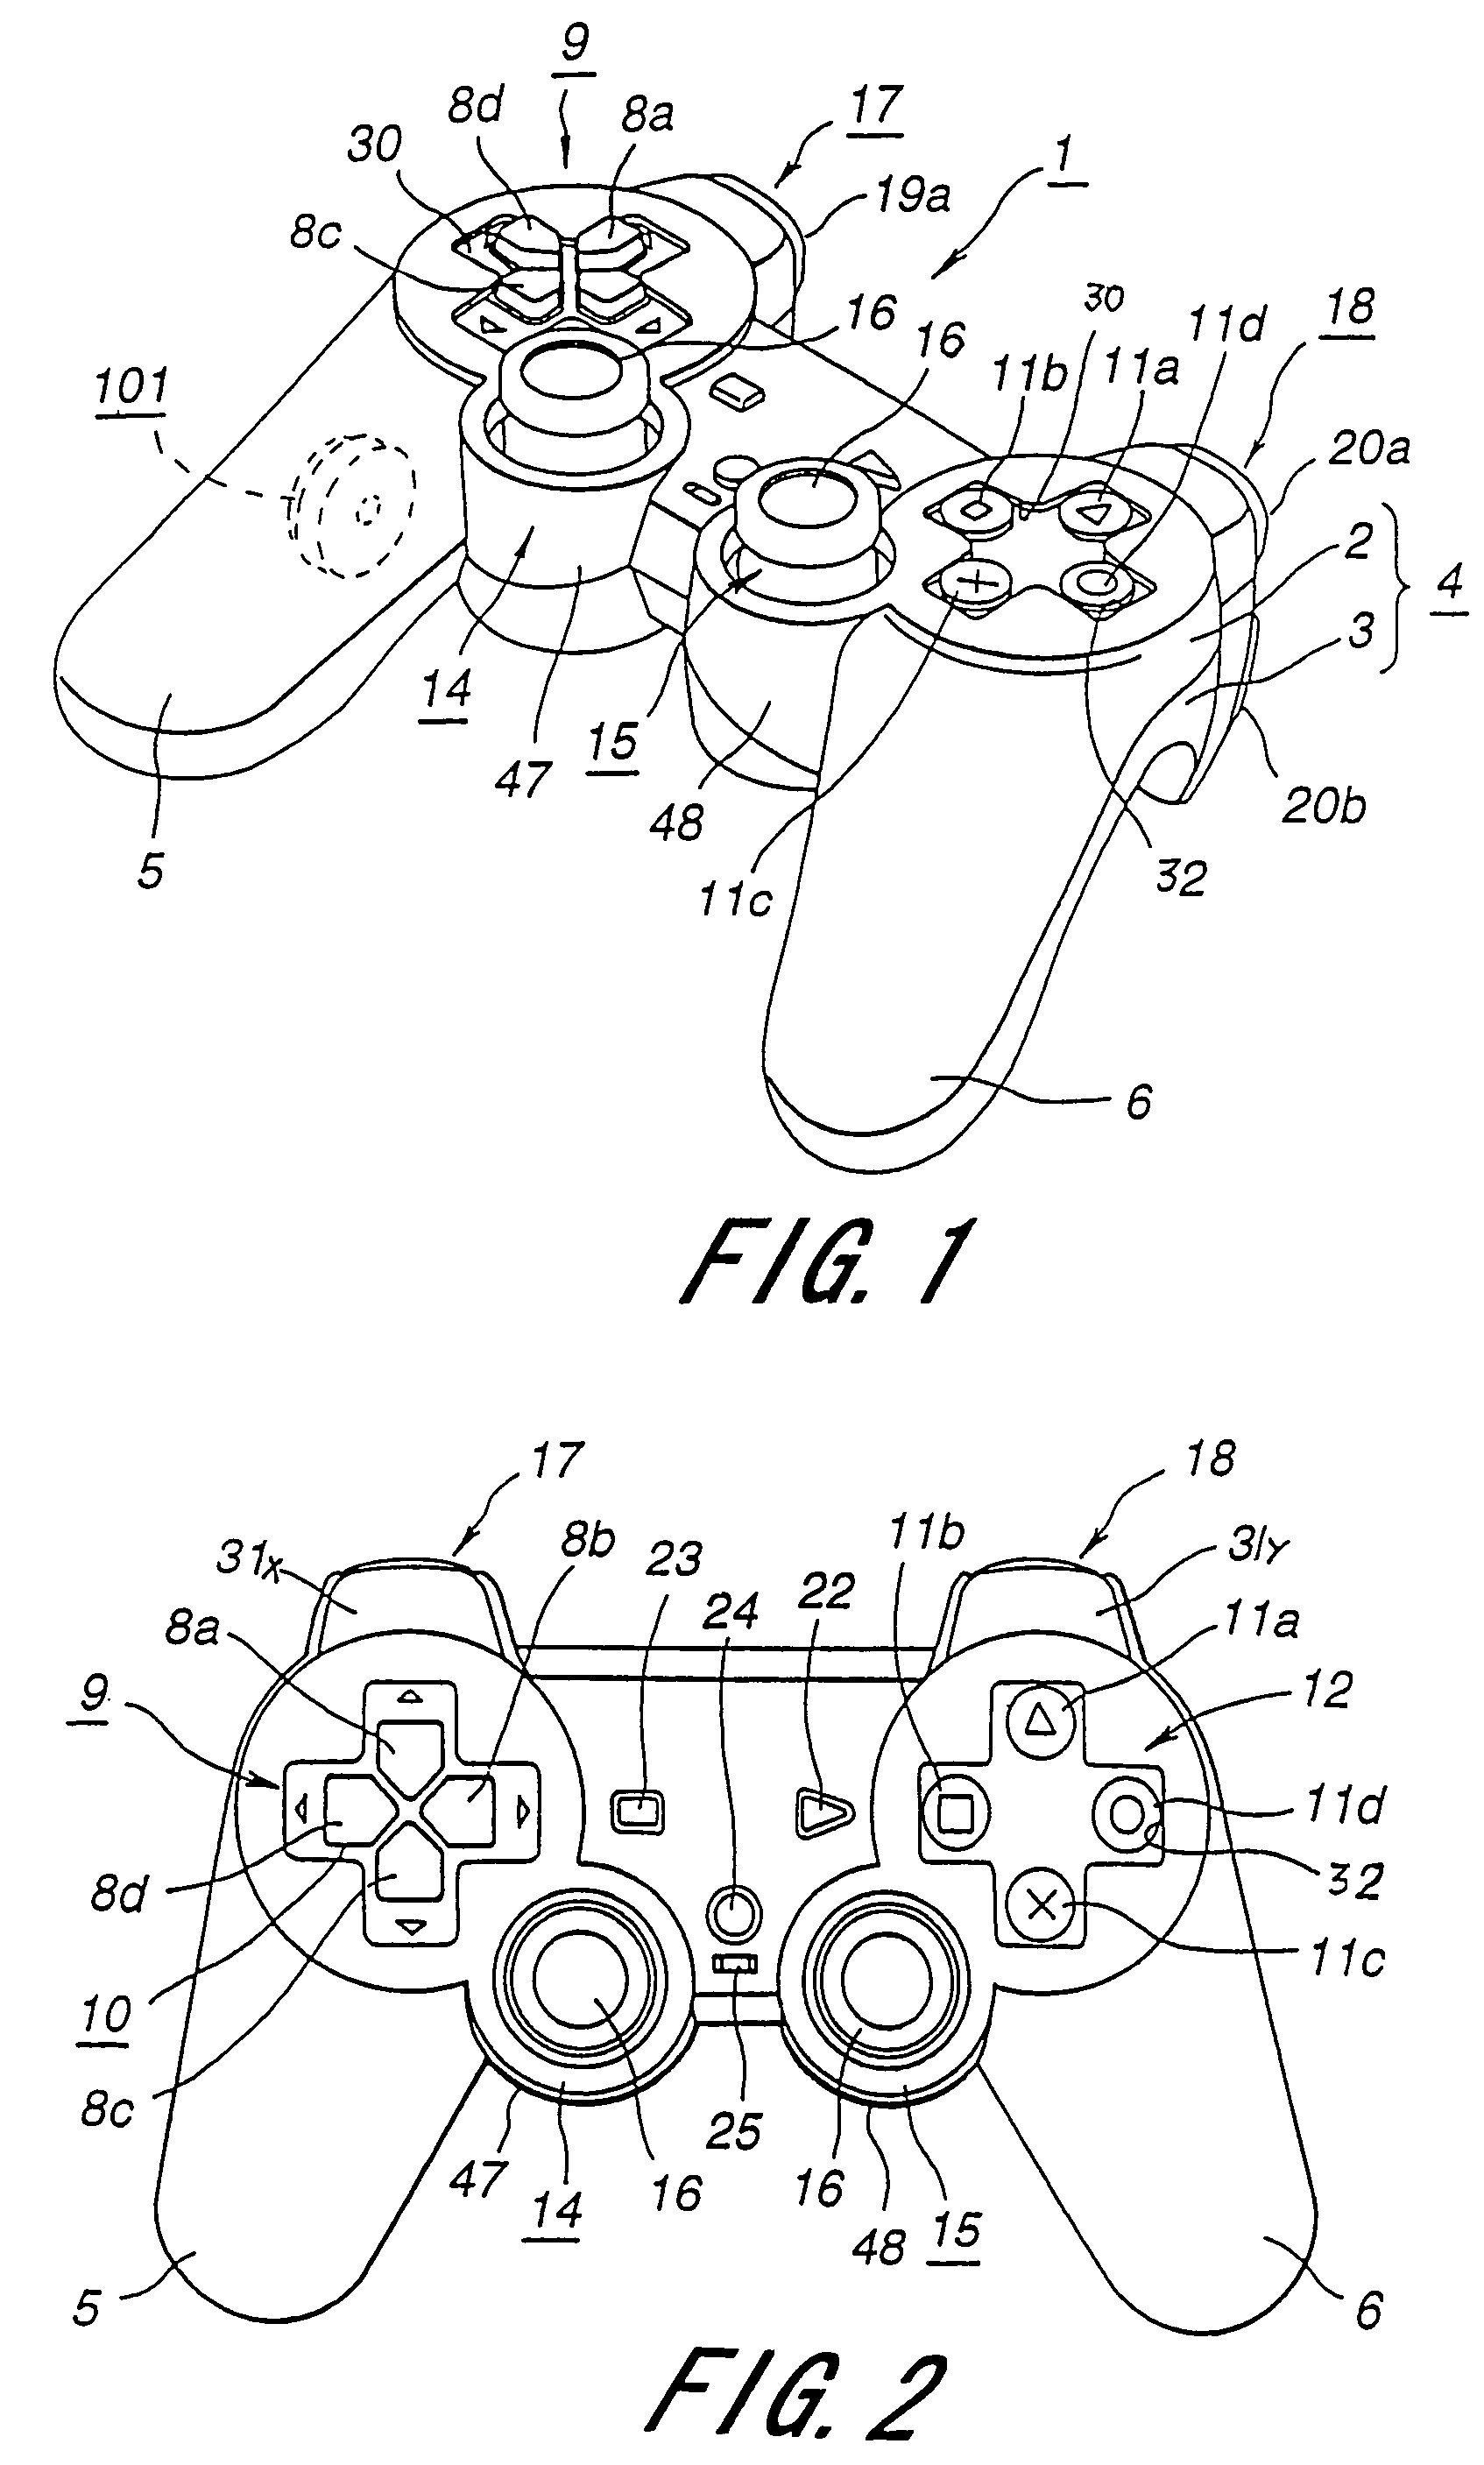 Control unit and system utilizing the control unit